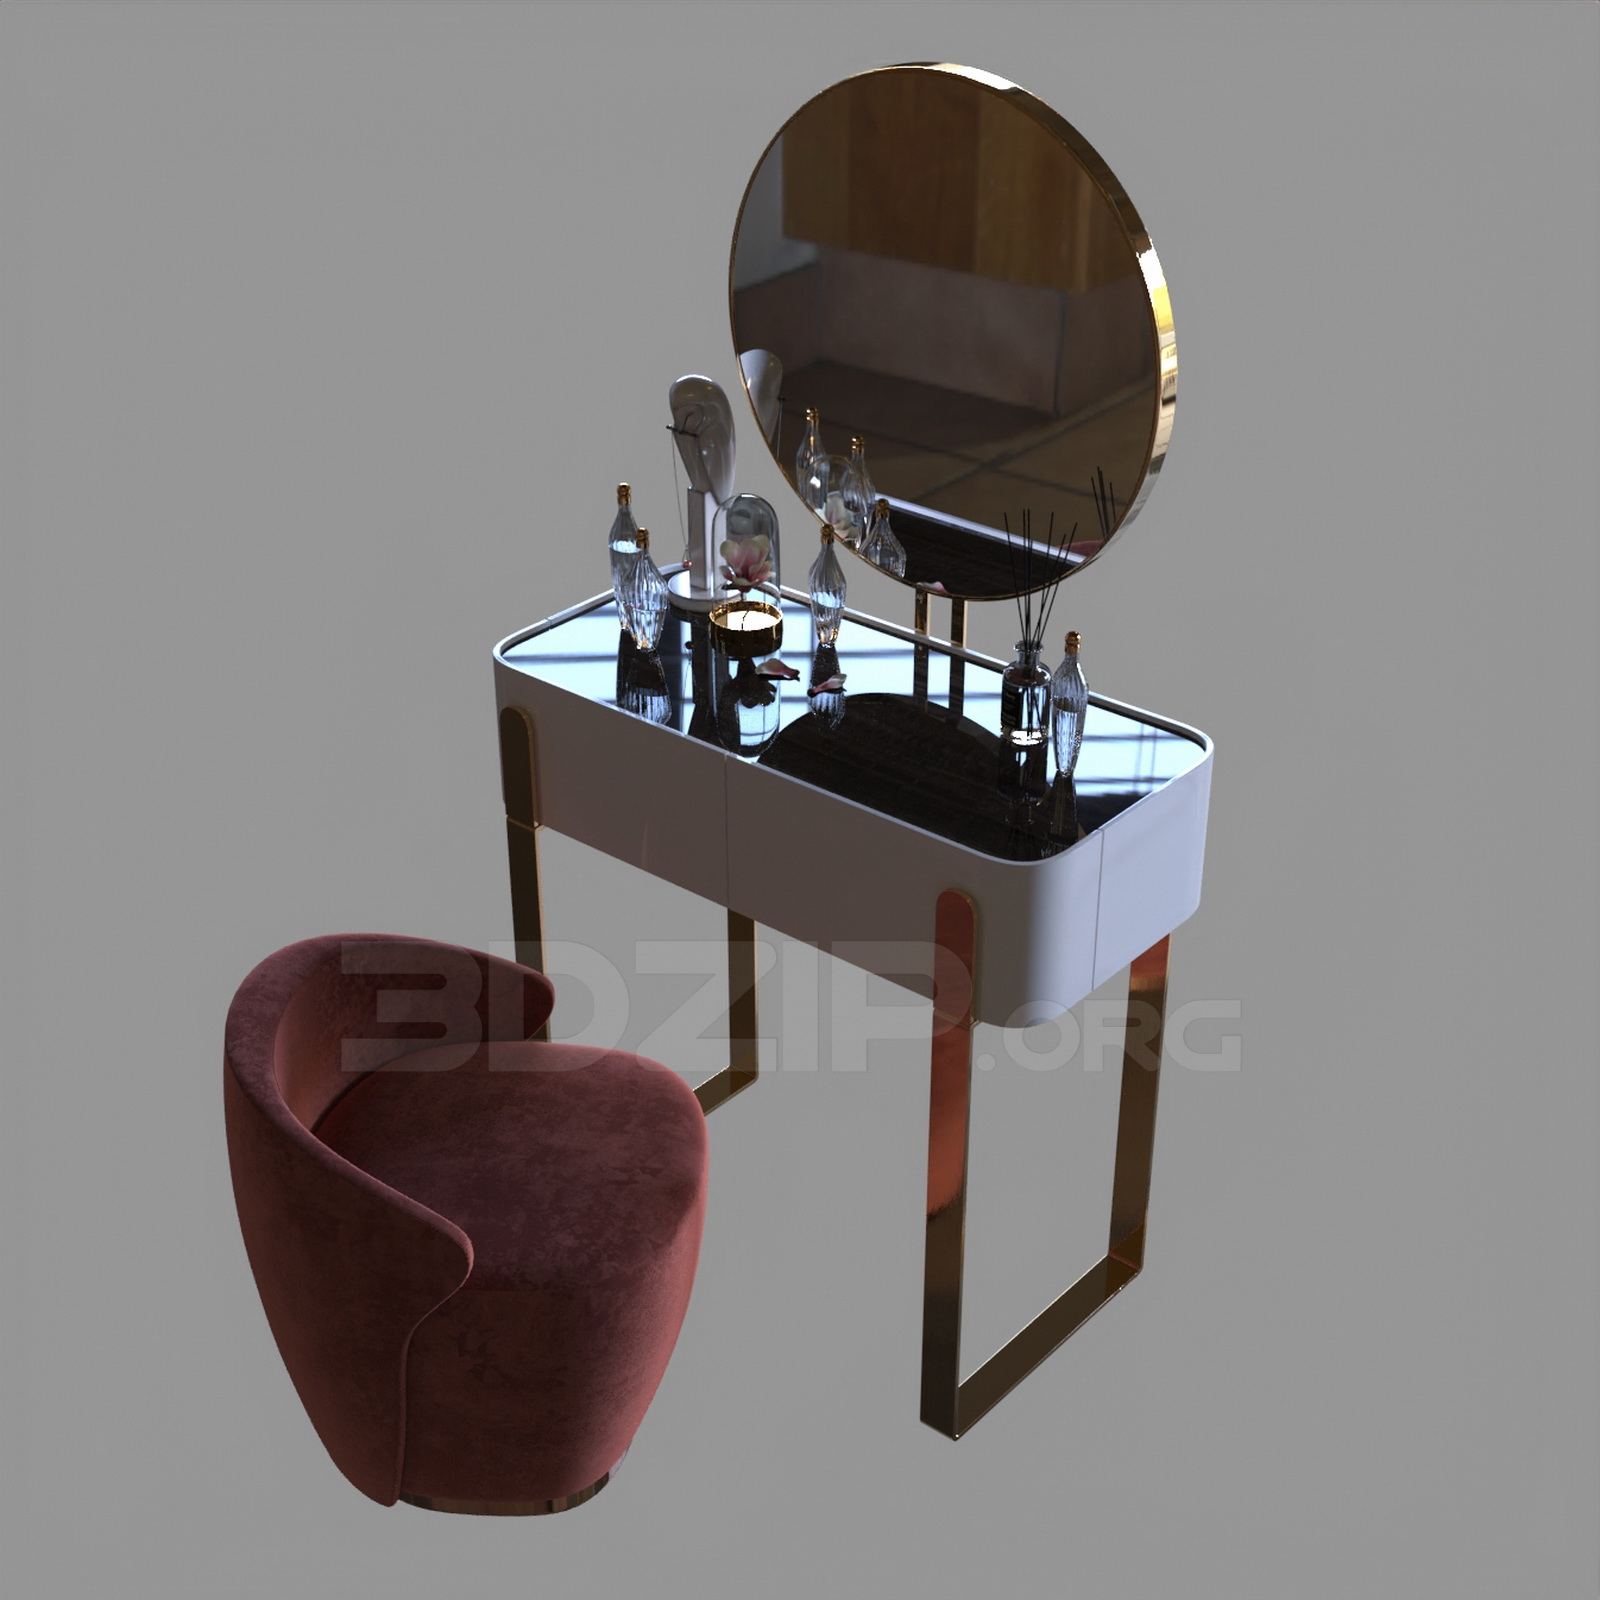 12335. Download Free Dressing Table Model By Tu Minh